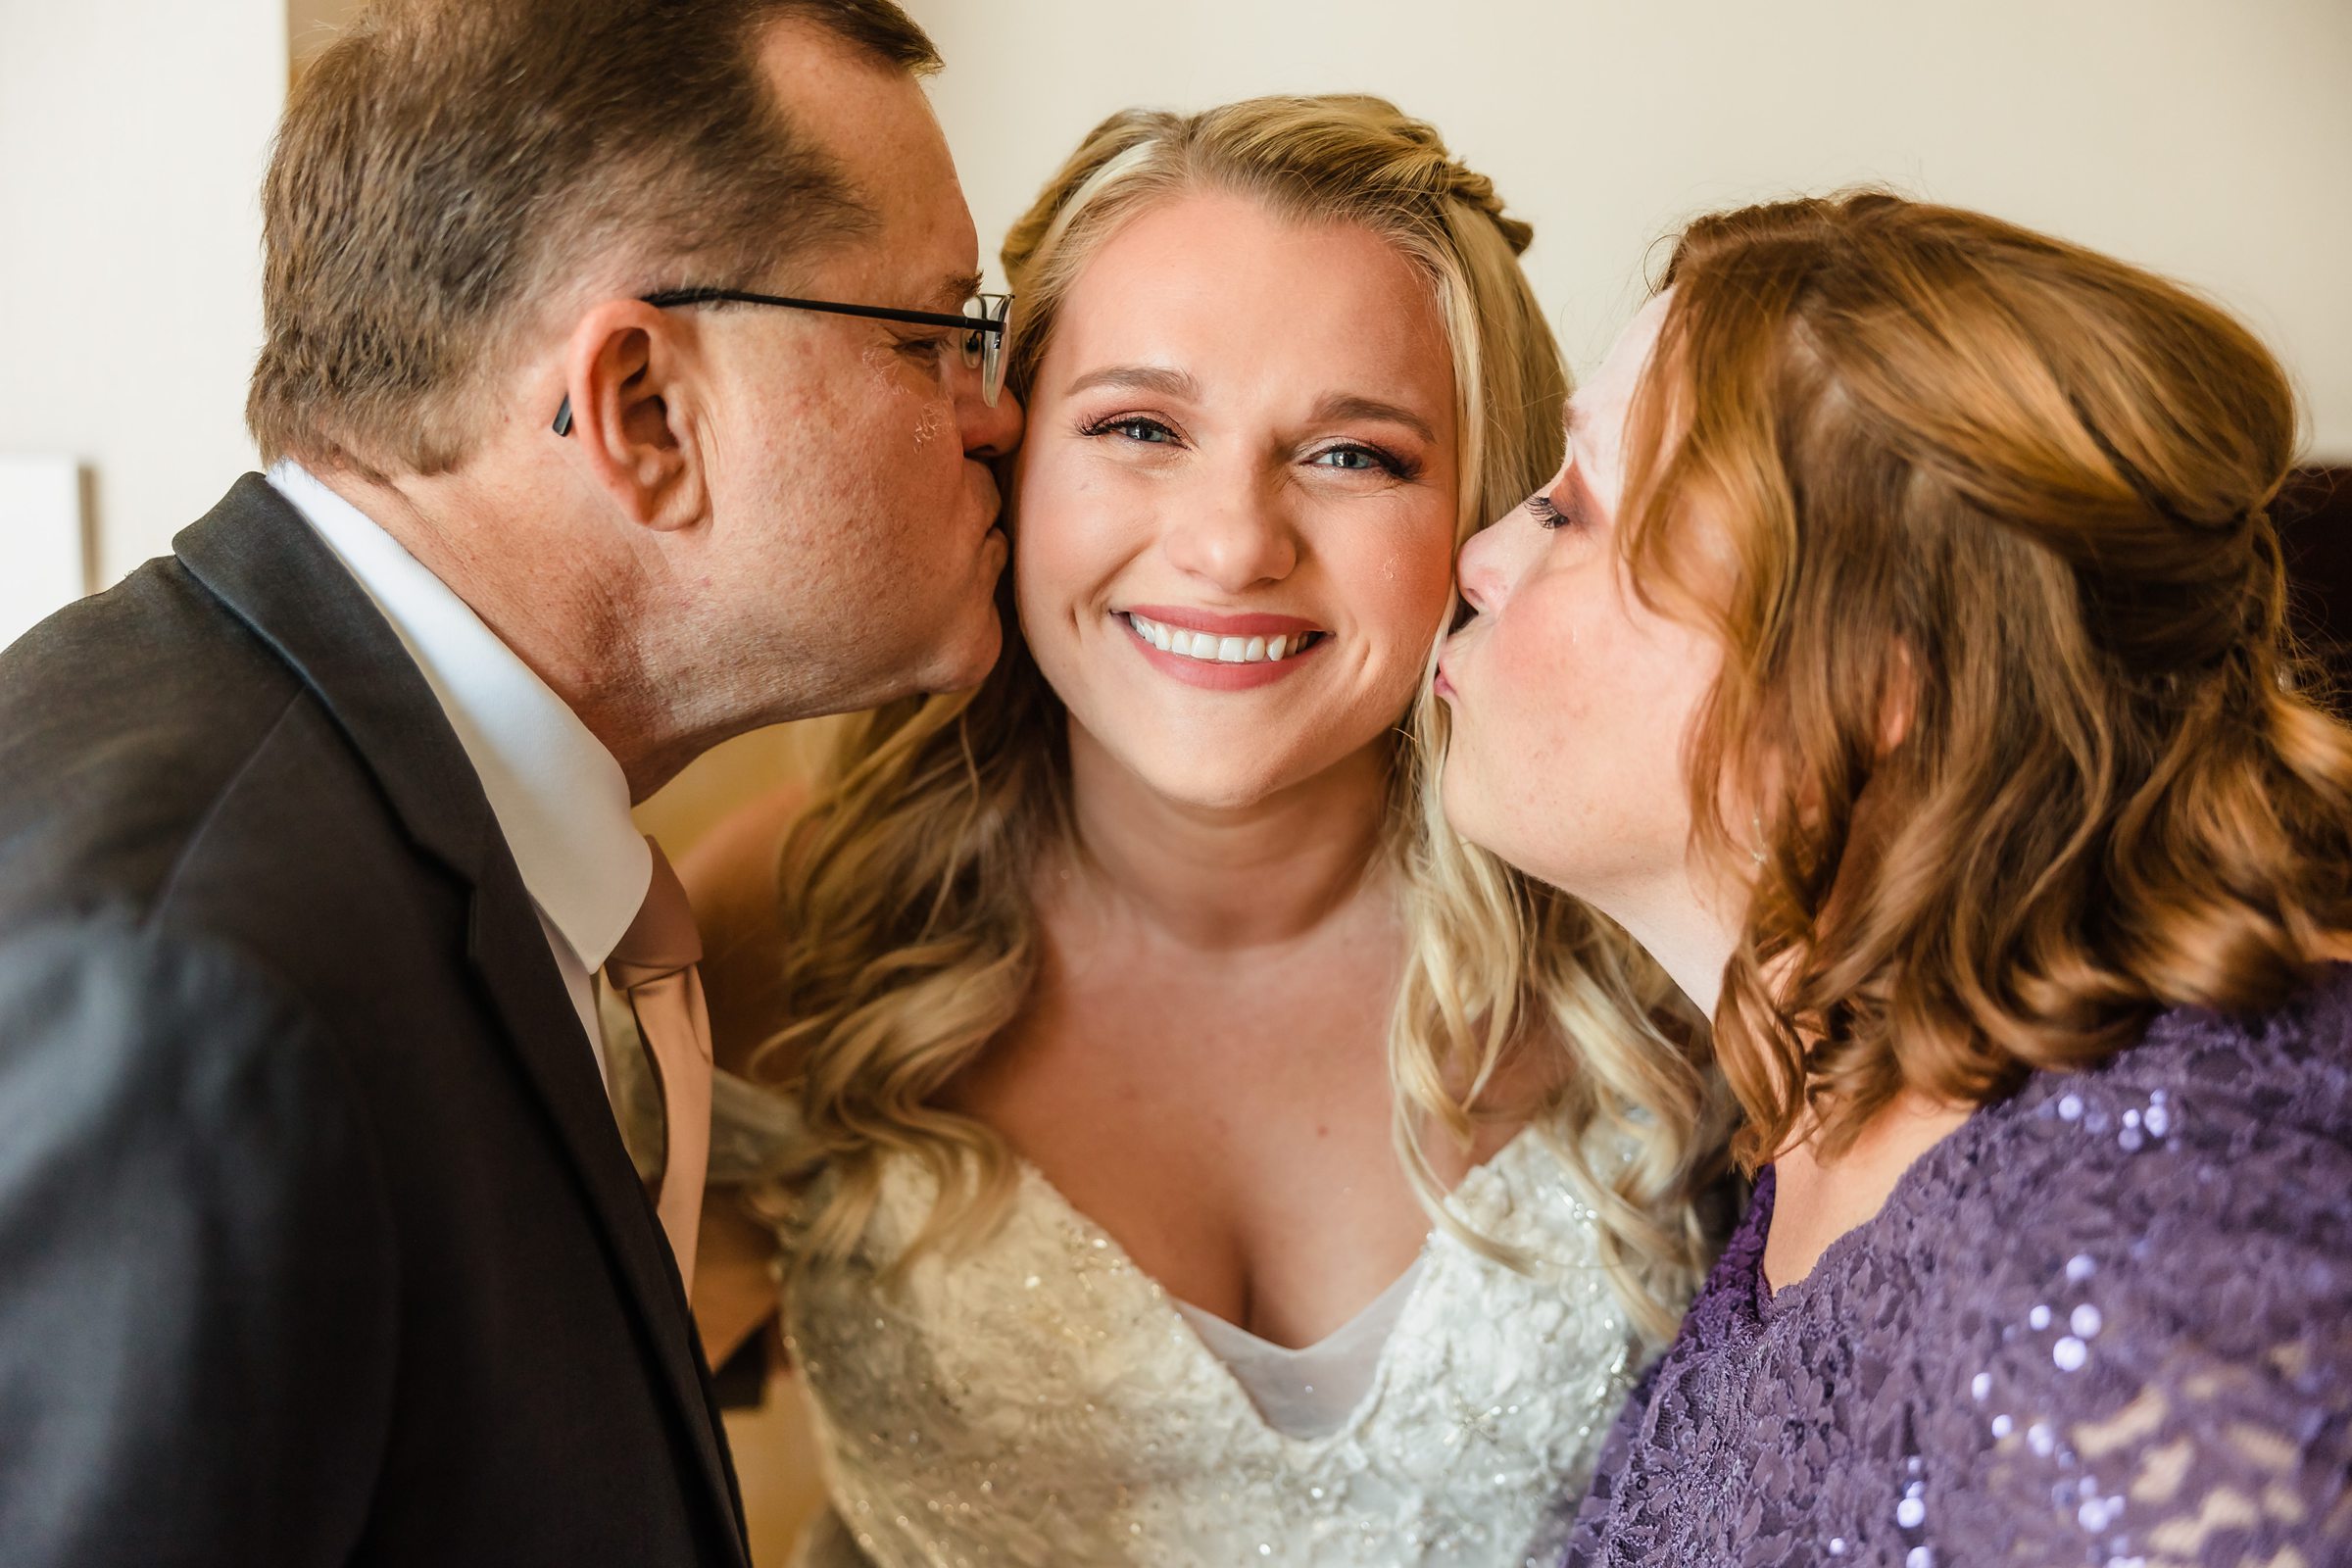 Mom and dad kiss the bride before her wedding at the Destihl Brewery in Normal, Illinois.